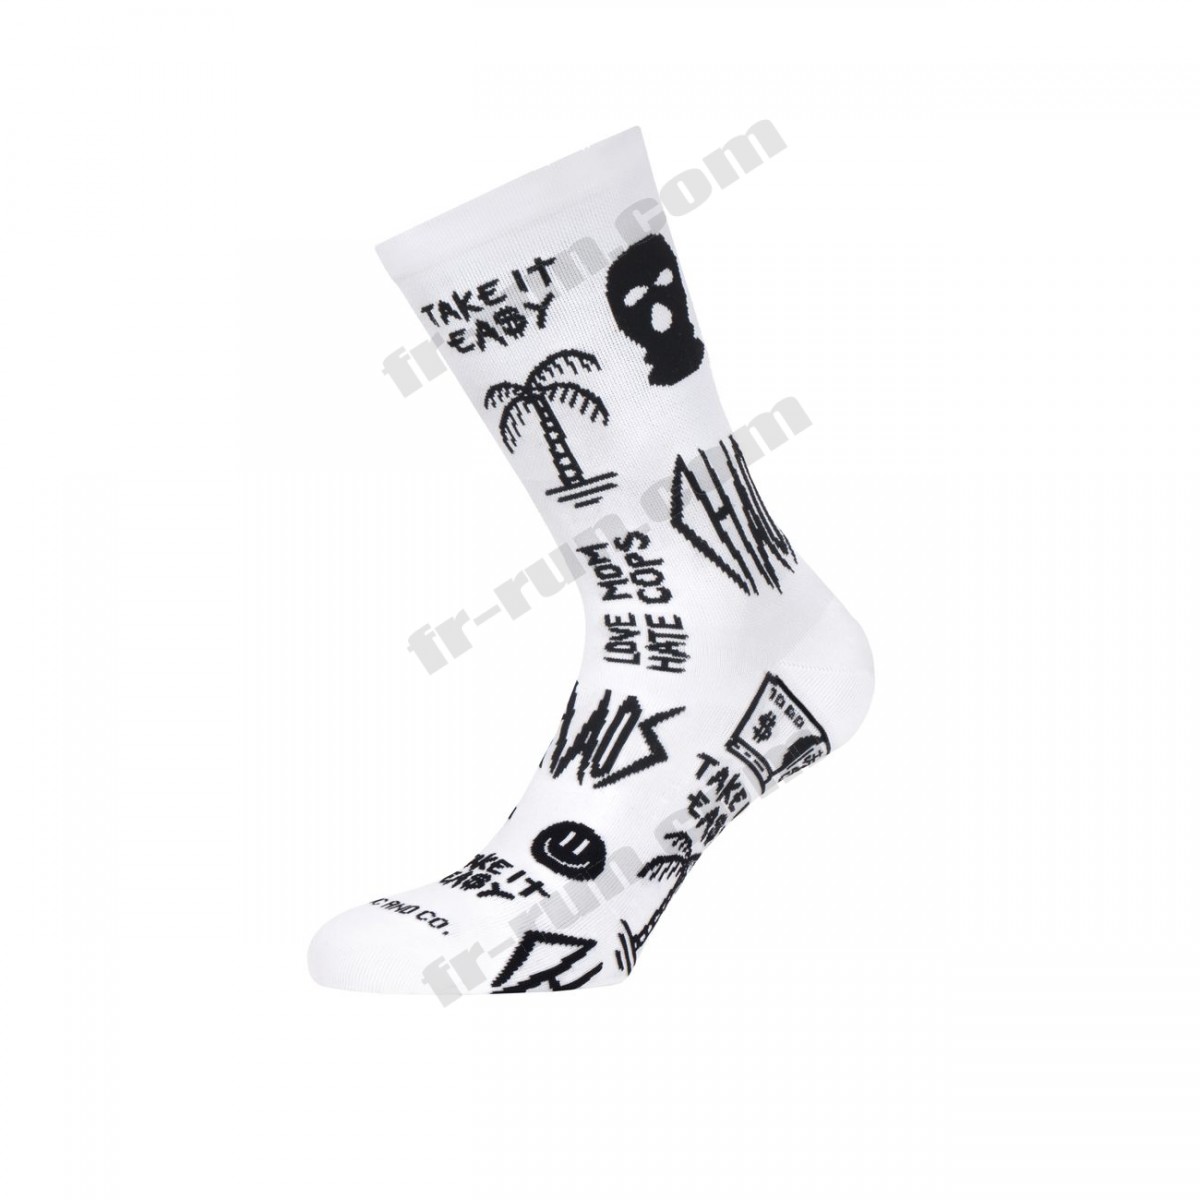 Pacific And Co/running adulte PACIFIC and CO MIAMI VICE Unisex Performance Socks ◇◇◇ Pas Cher Du Tout - Pacific And Co/running adulte PACIFIC and CO MIAMI VICE Unisex Performance Socks ◇◇◇ Pas Cher Du Tout